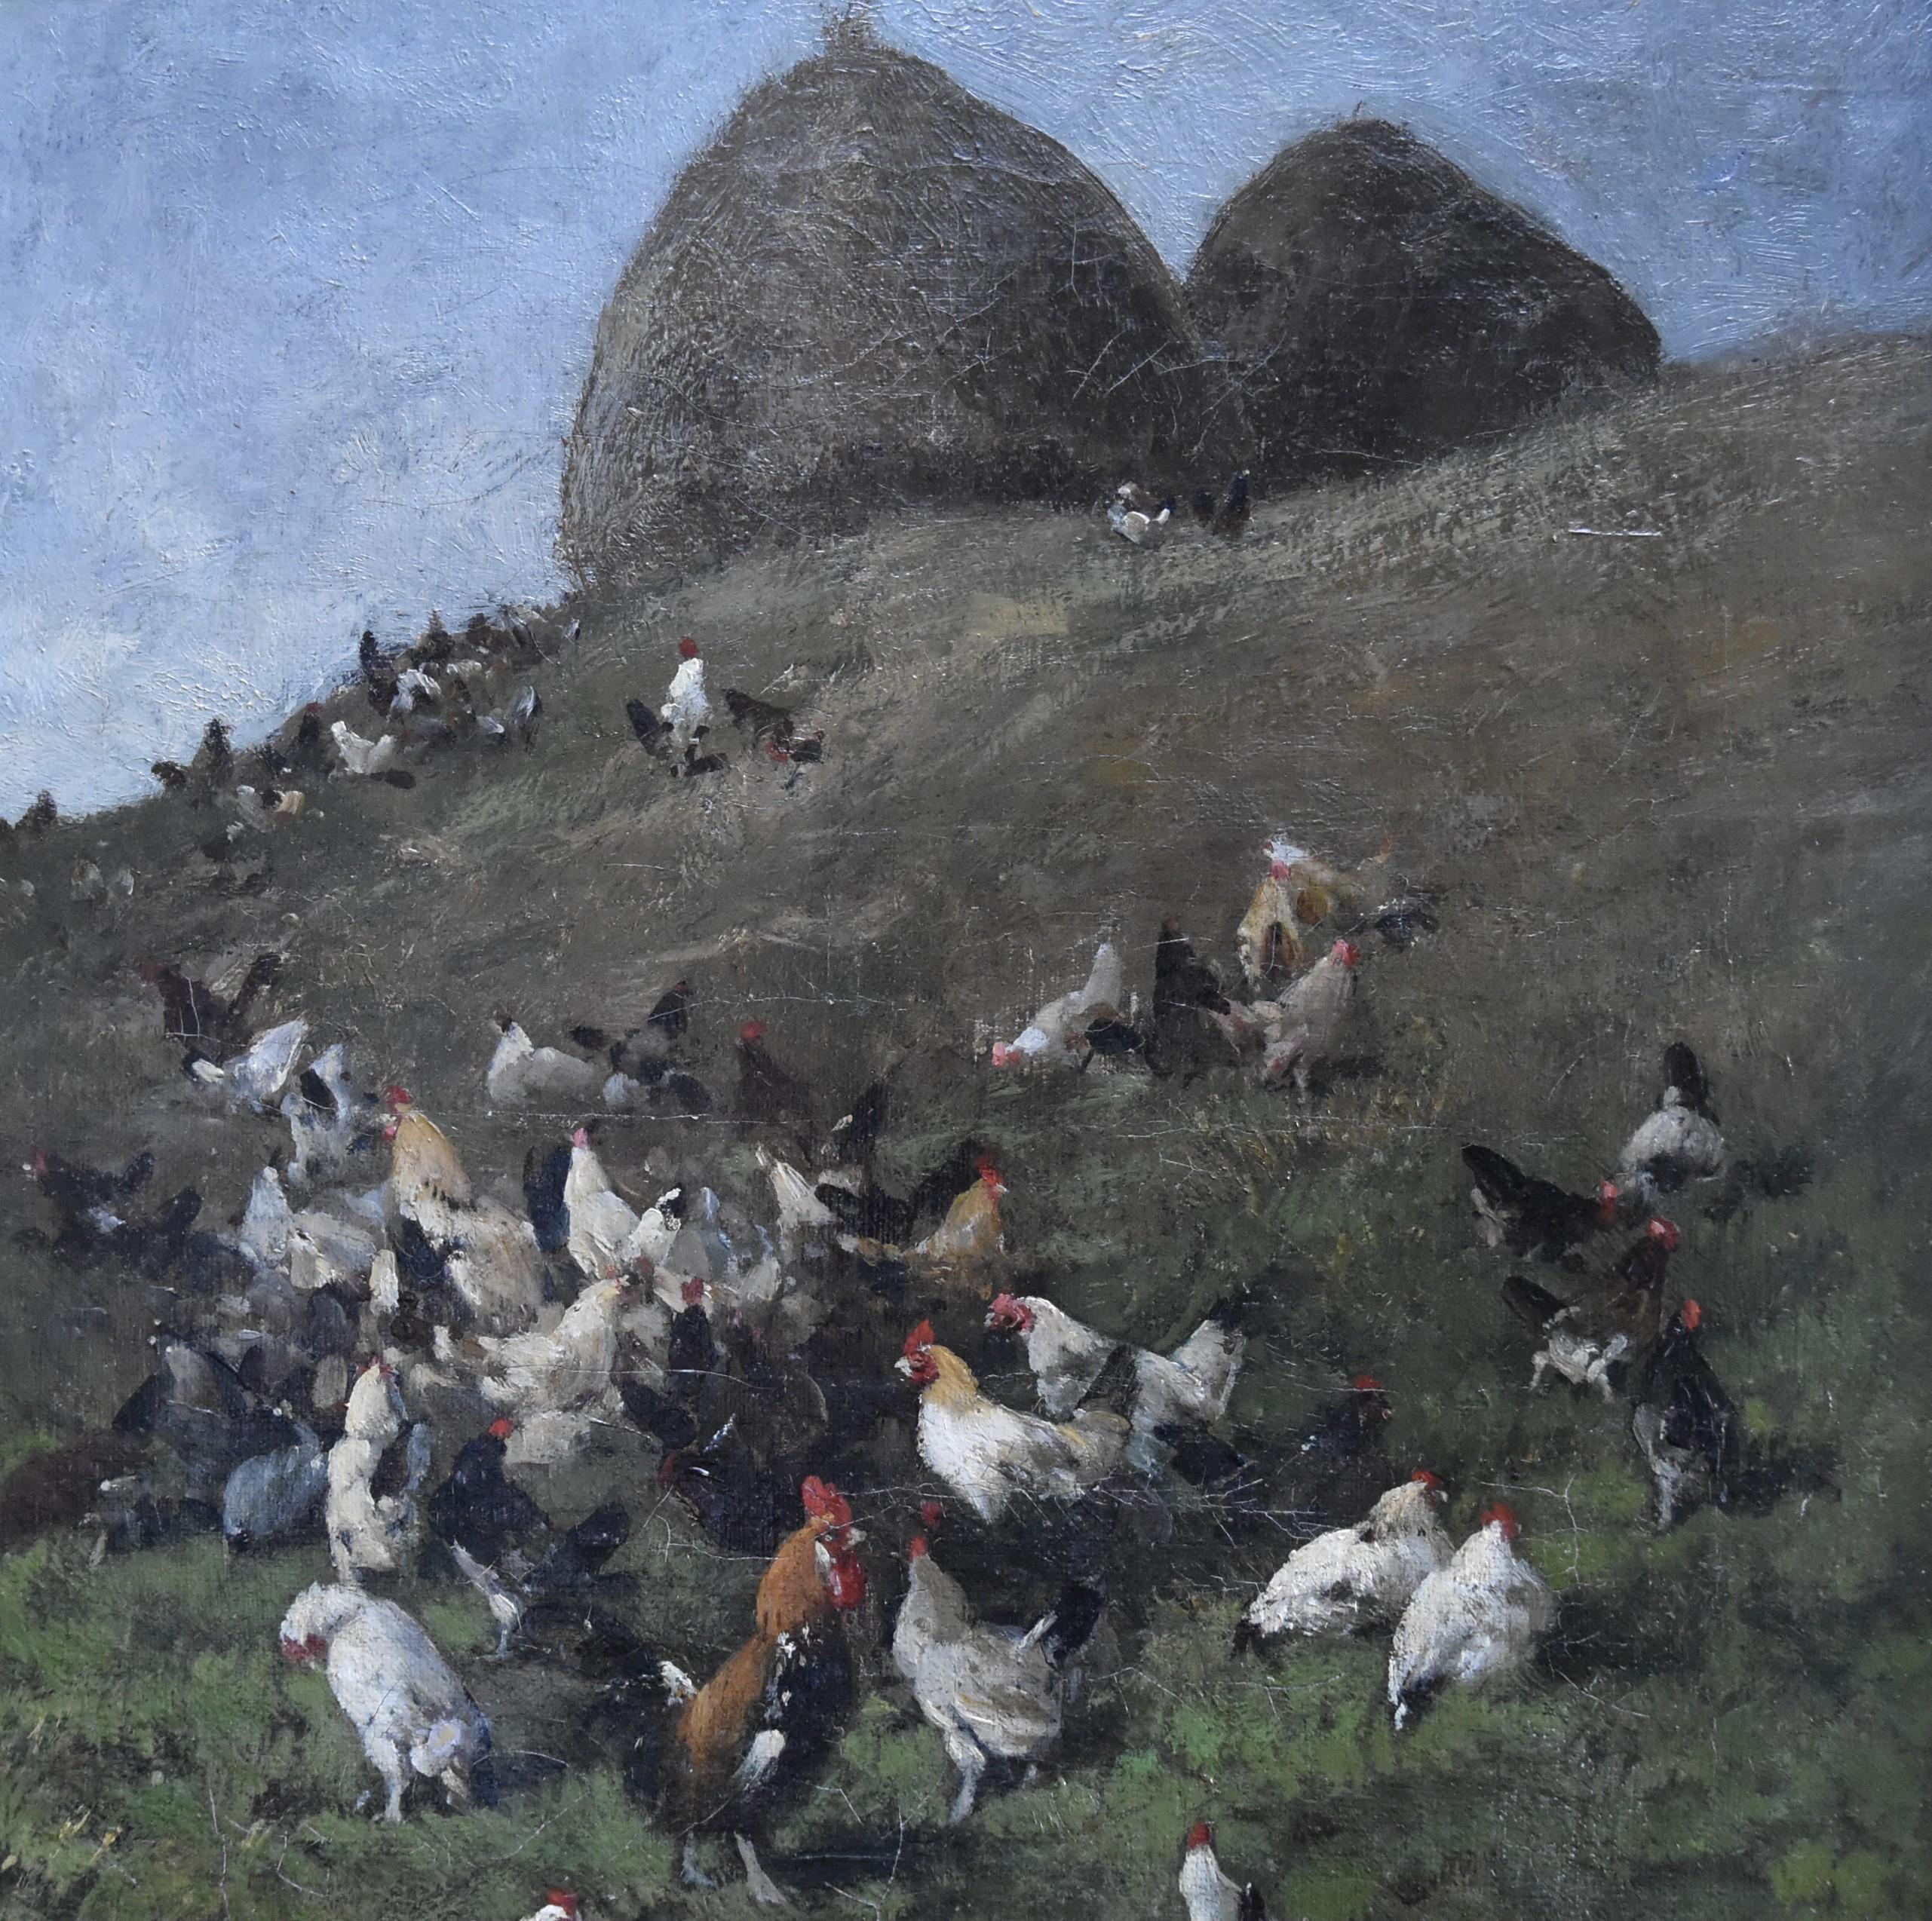 Alexandre Defaux (1826-1900) 
Hens and roosters in a field, 
oil on canvas
40 x 32.5
Signed lower right
In quite good condition: relined, cracks, recently cleaned and restored. (see photographs please)
In a modern frame : 52 x 44.5 cm

Alexandre